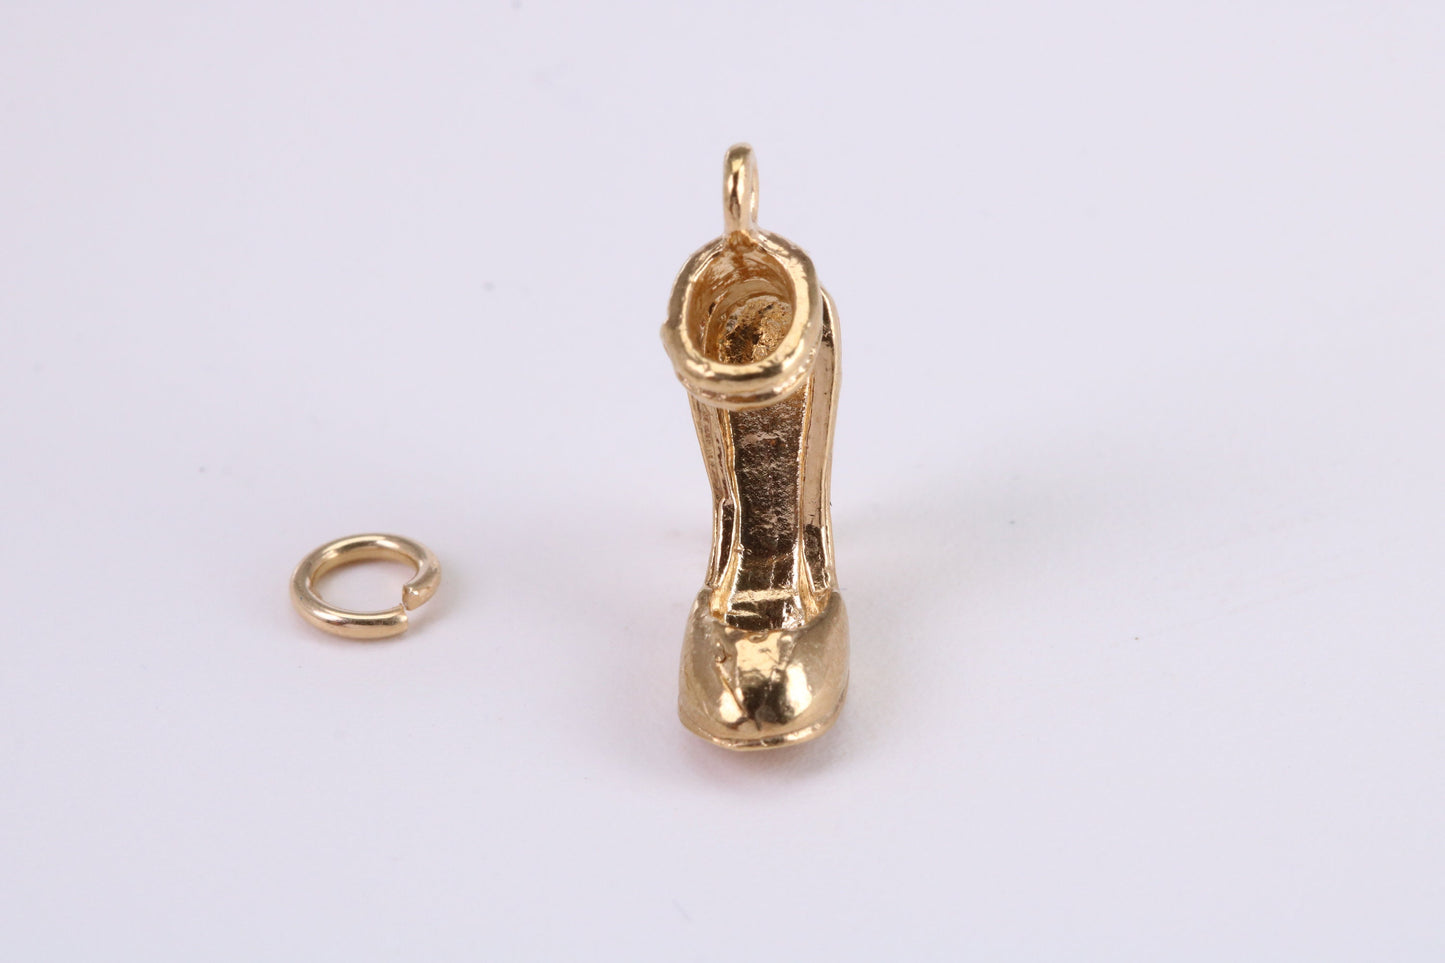 Stiletto Charm, Traditional Charm, Made from Solid Yellow Gold, British Hallmarked, Complete with Attachment Link